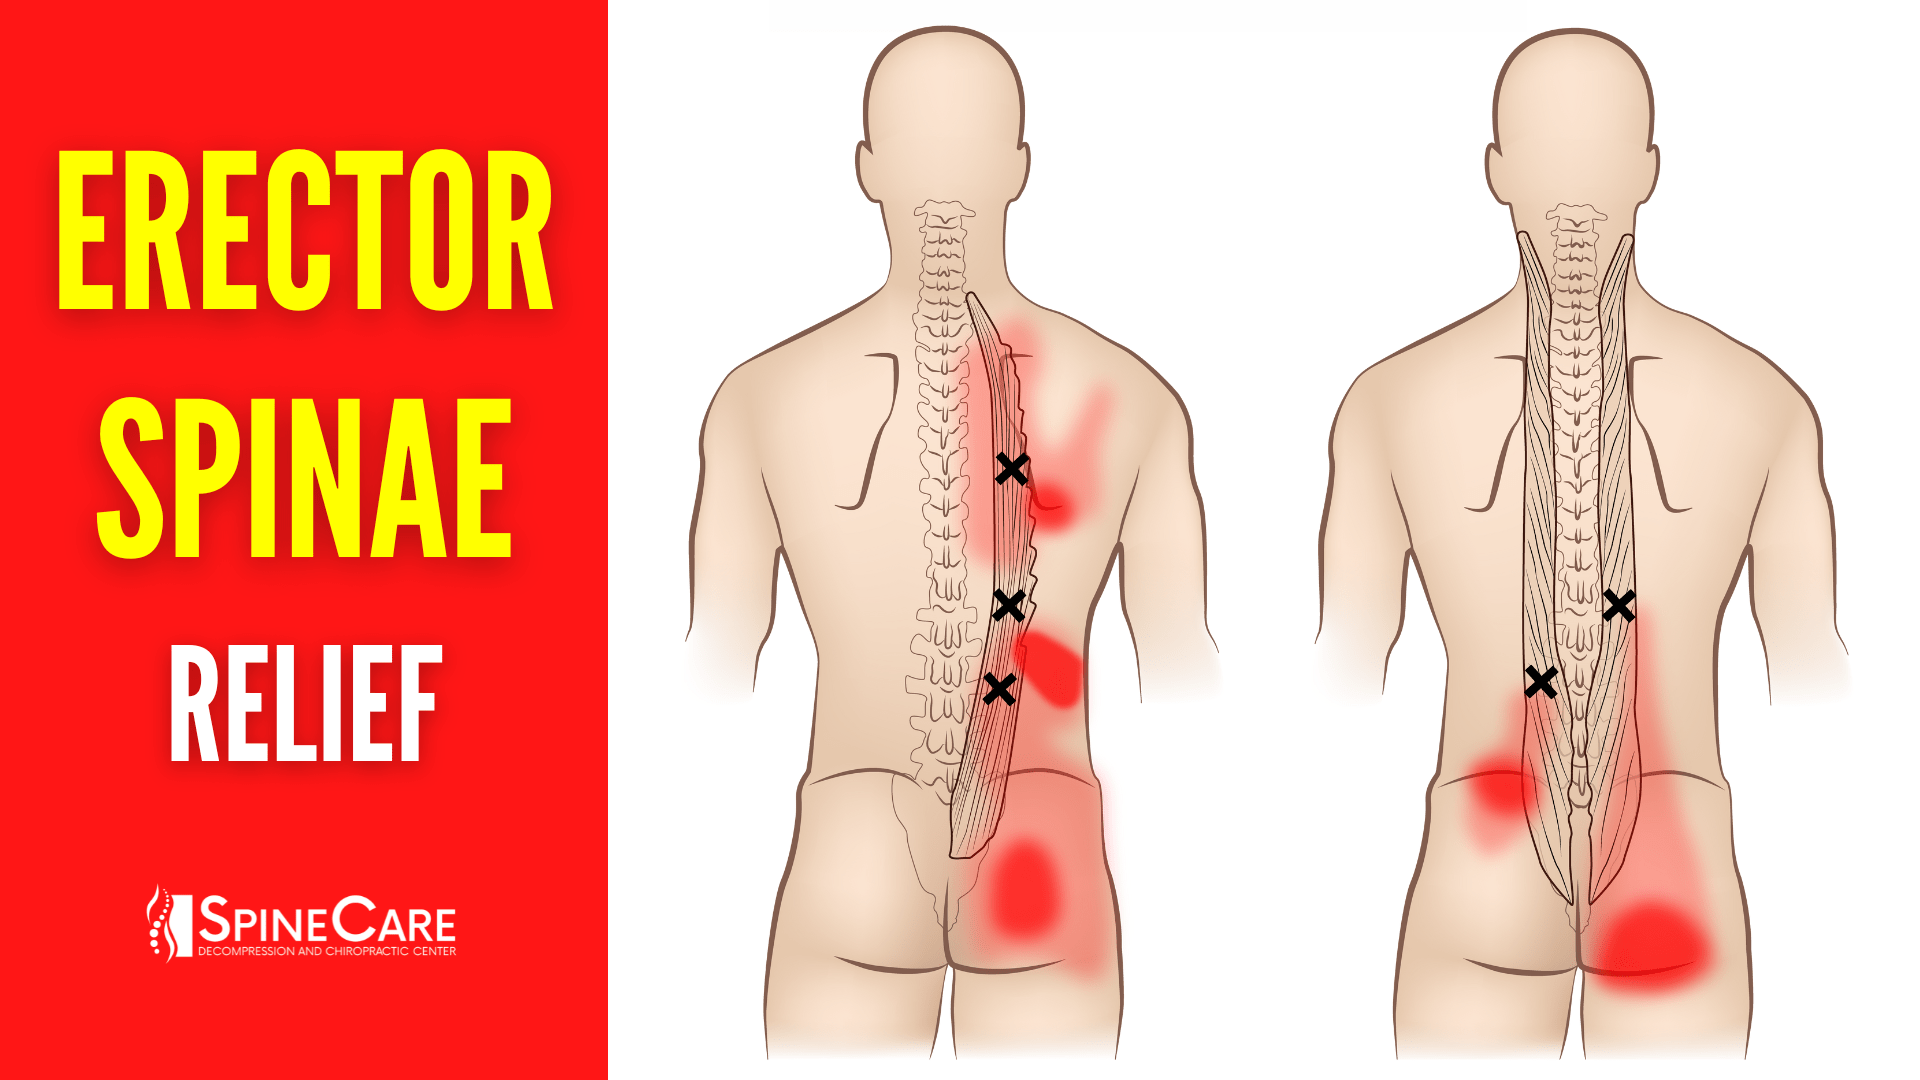 How to Fix Erector Spinae Pain FOR GOOD | SpineCare | St. Joseph, Michigan Chiropractor